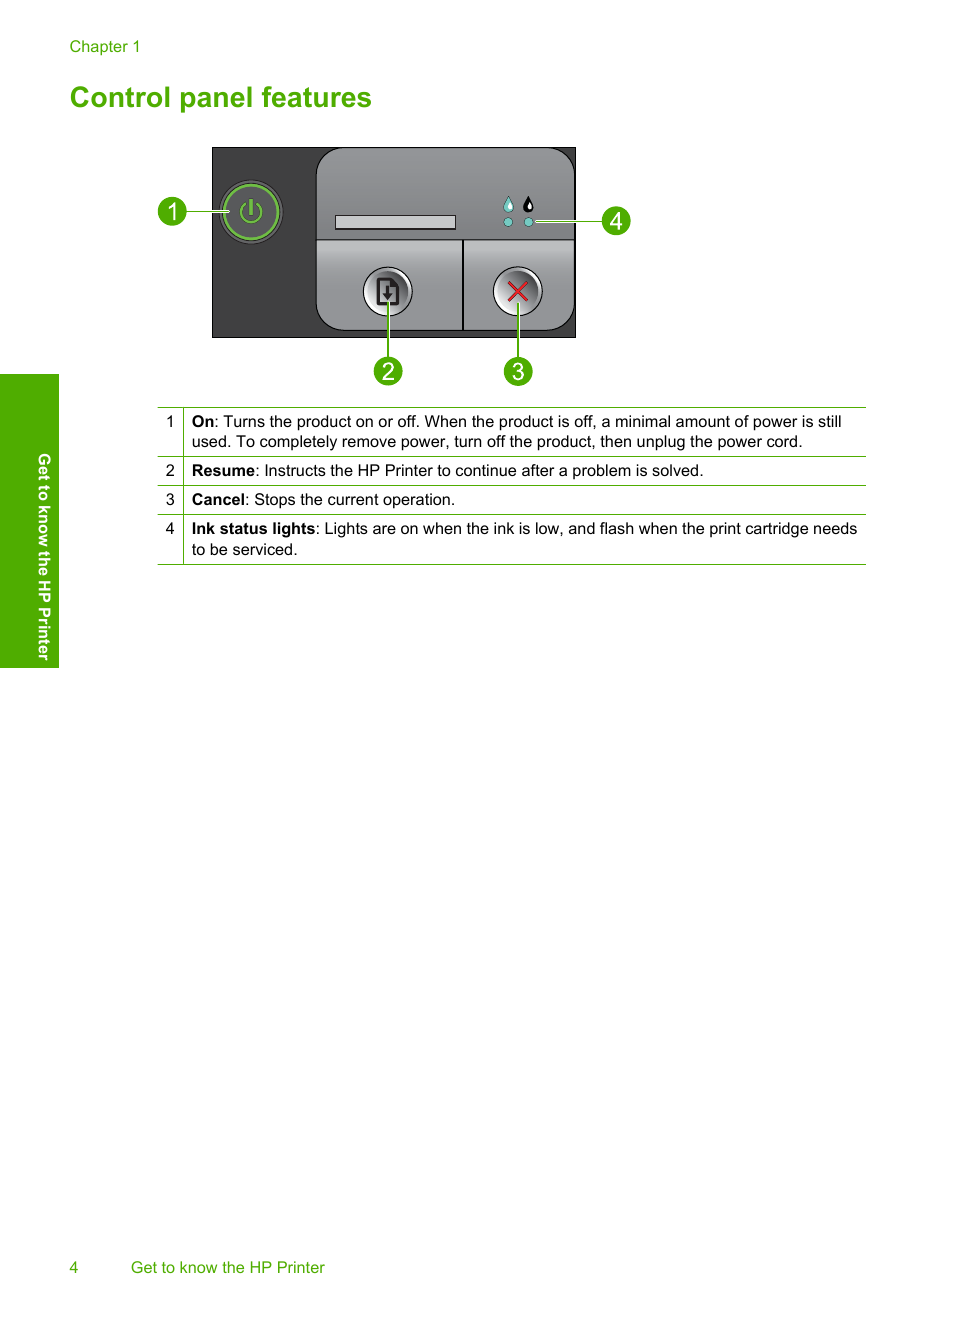 Control panel features | HP Deskjet D2680 Printer User Manual | Page 6 / 88